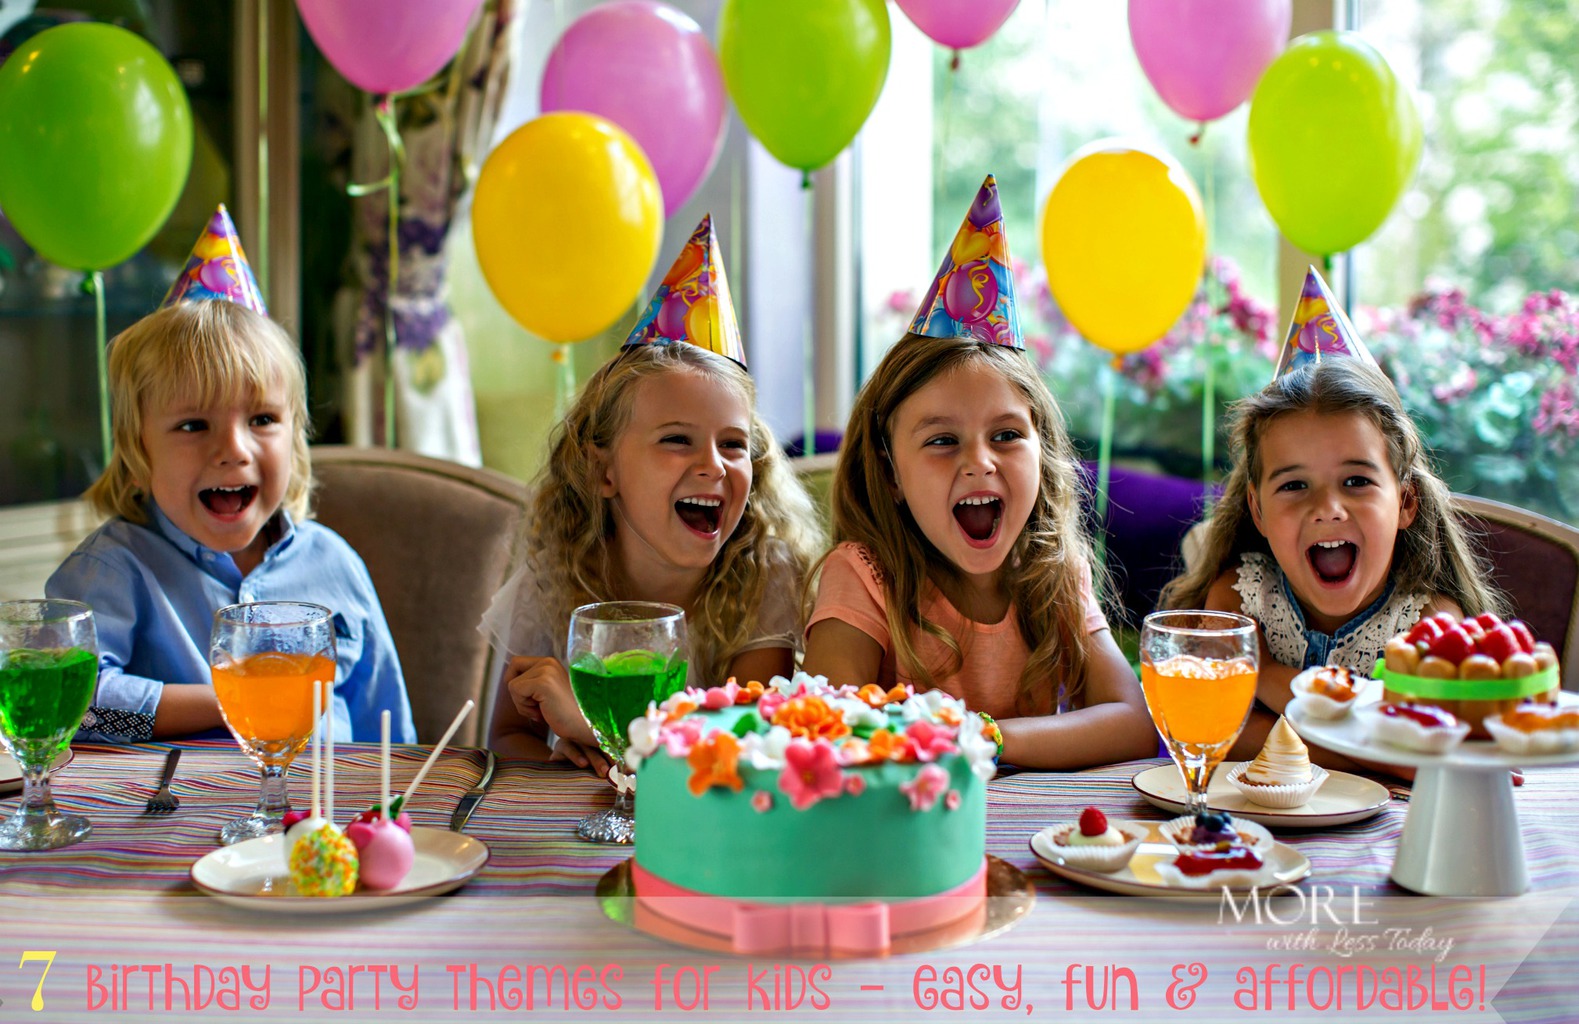 Fun and Inexpensive Theme Ideas for Kids Birthday Parties